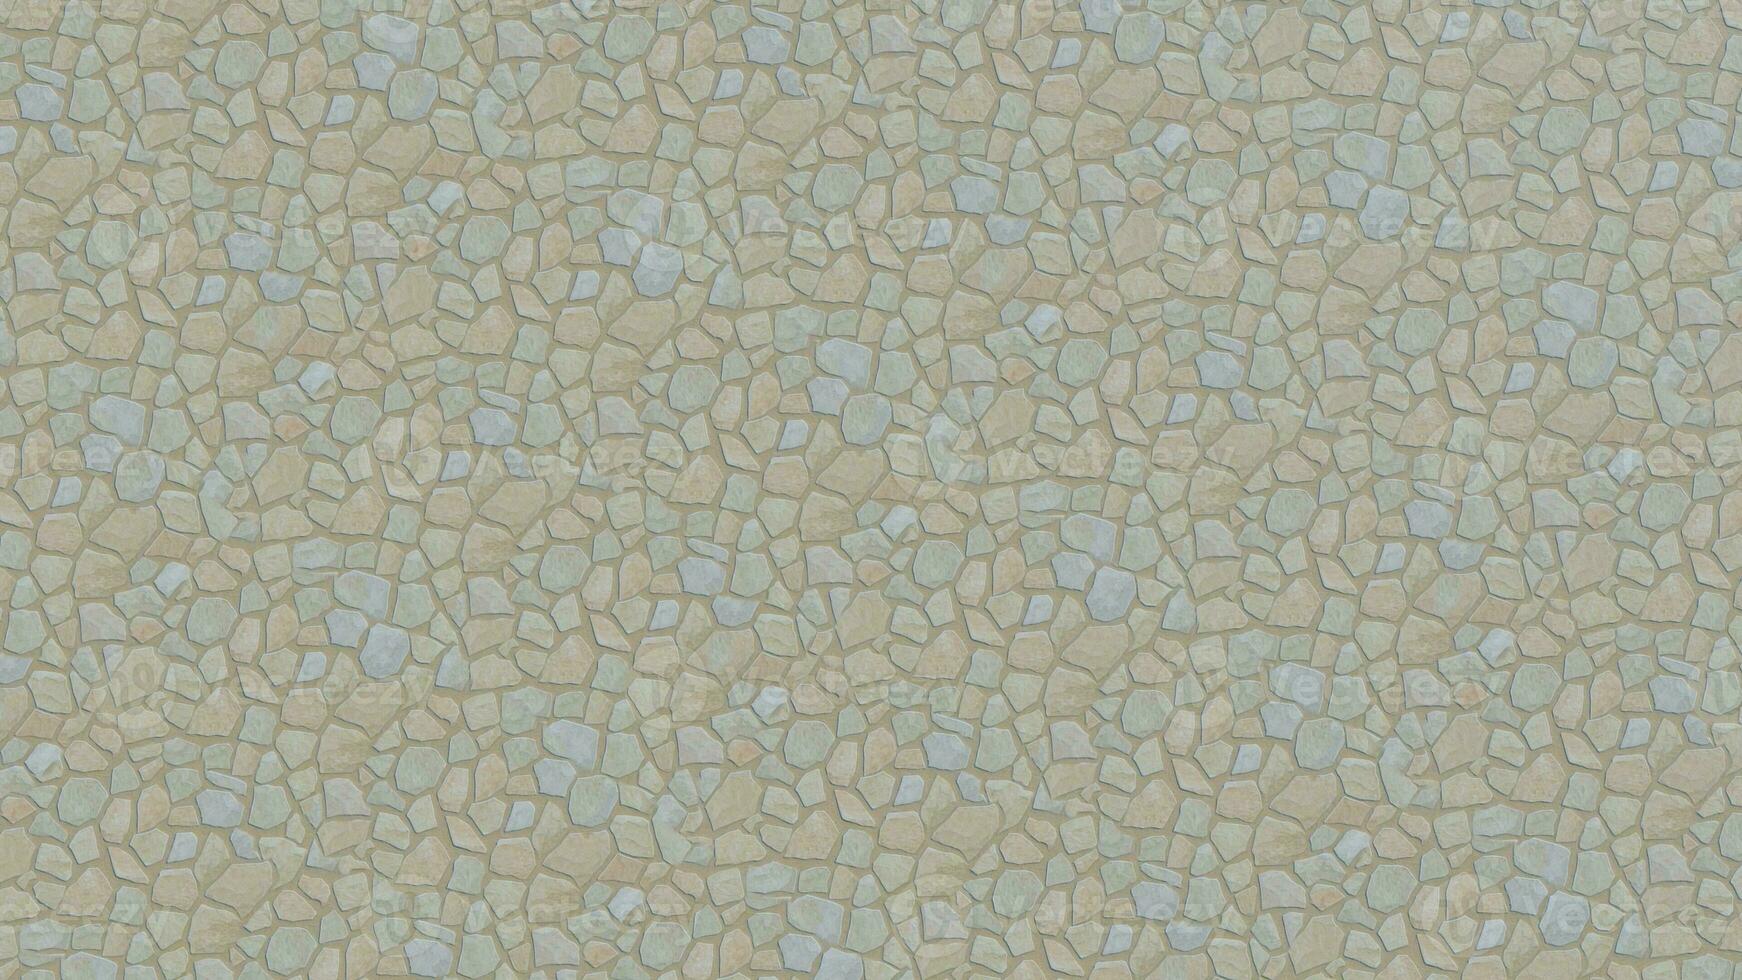 Stone texture cream for background or cover photo